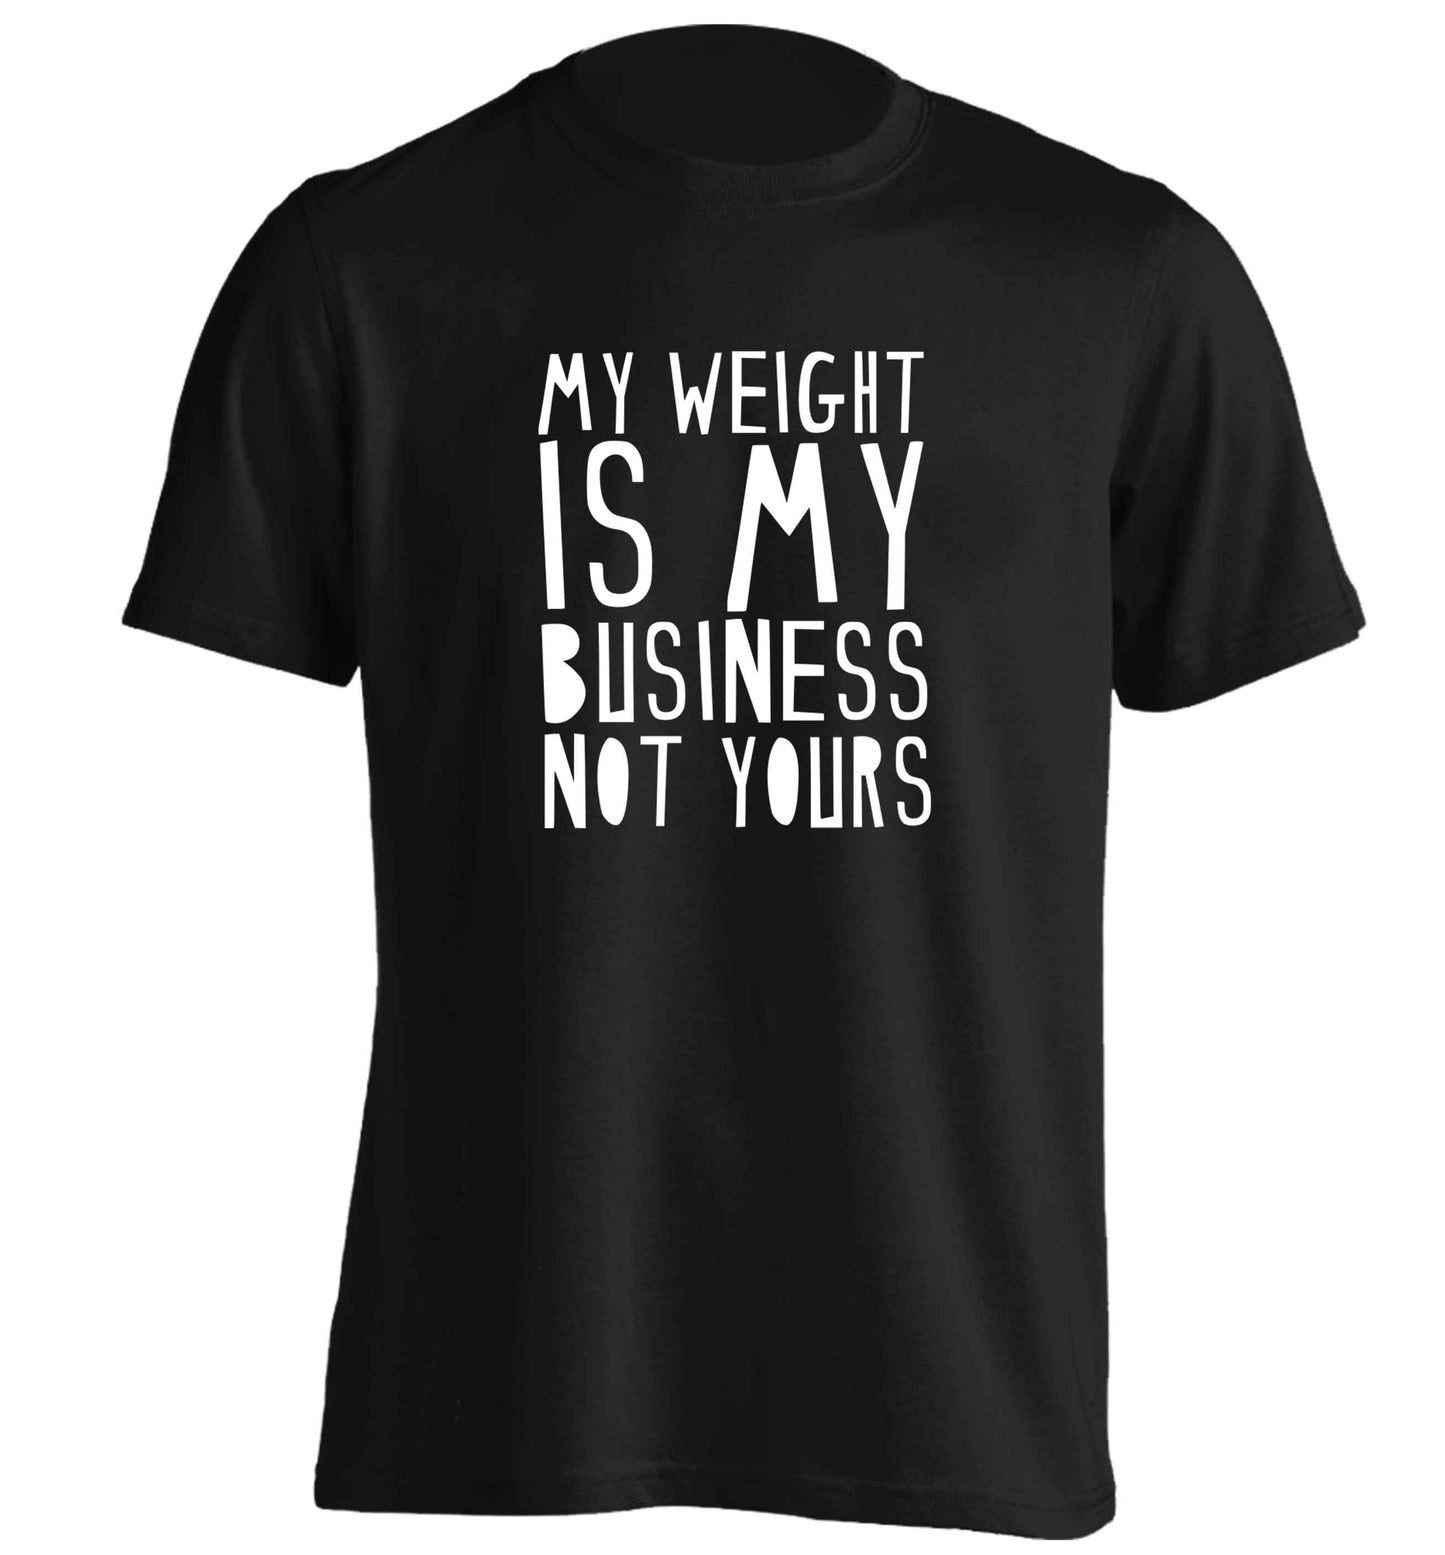 My weight is my business not yours adults unisex black Tshirt 2XL